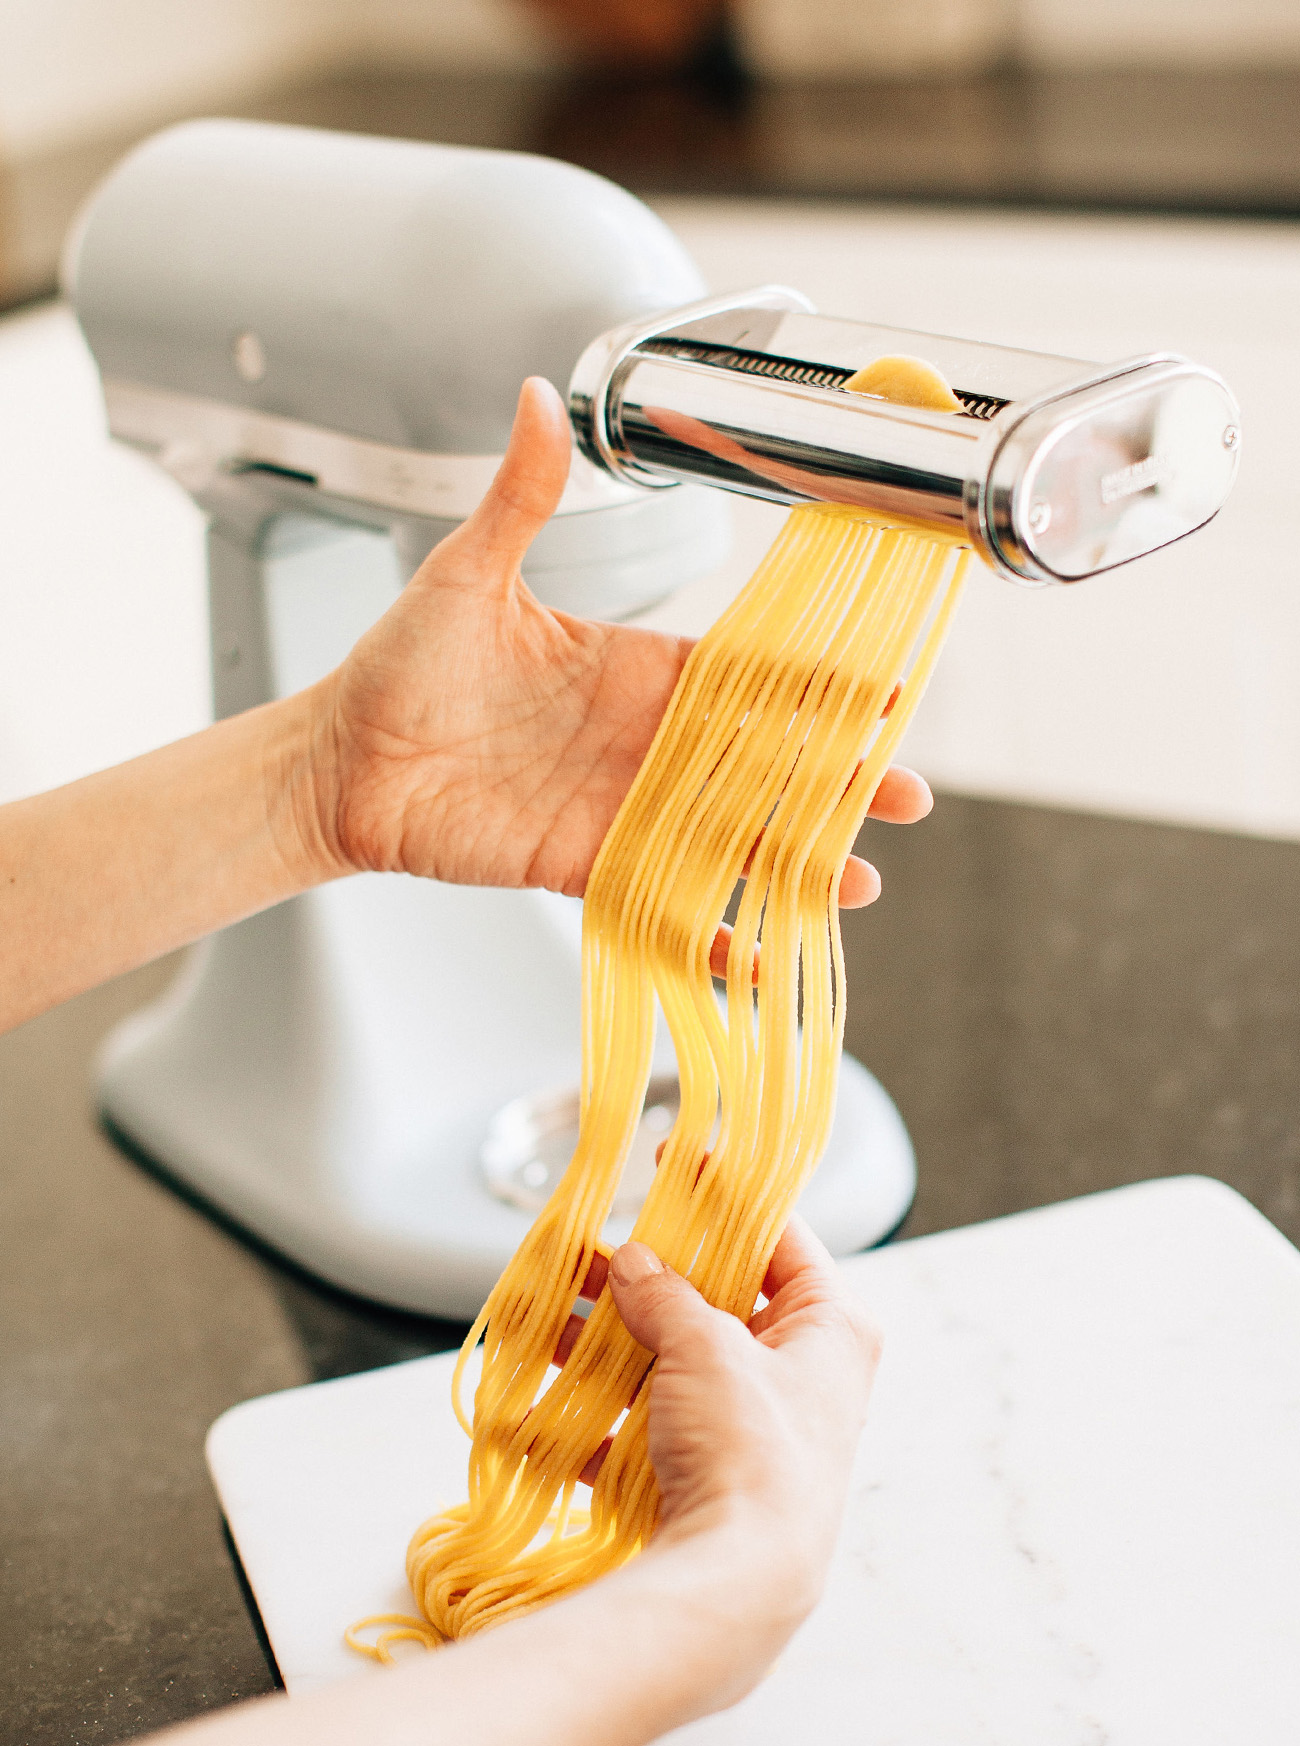 Making Pasta with Kitchen-Aid Mixer